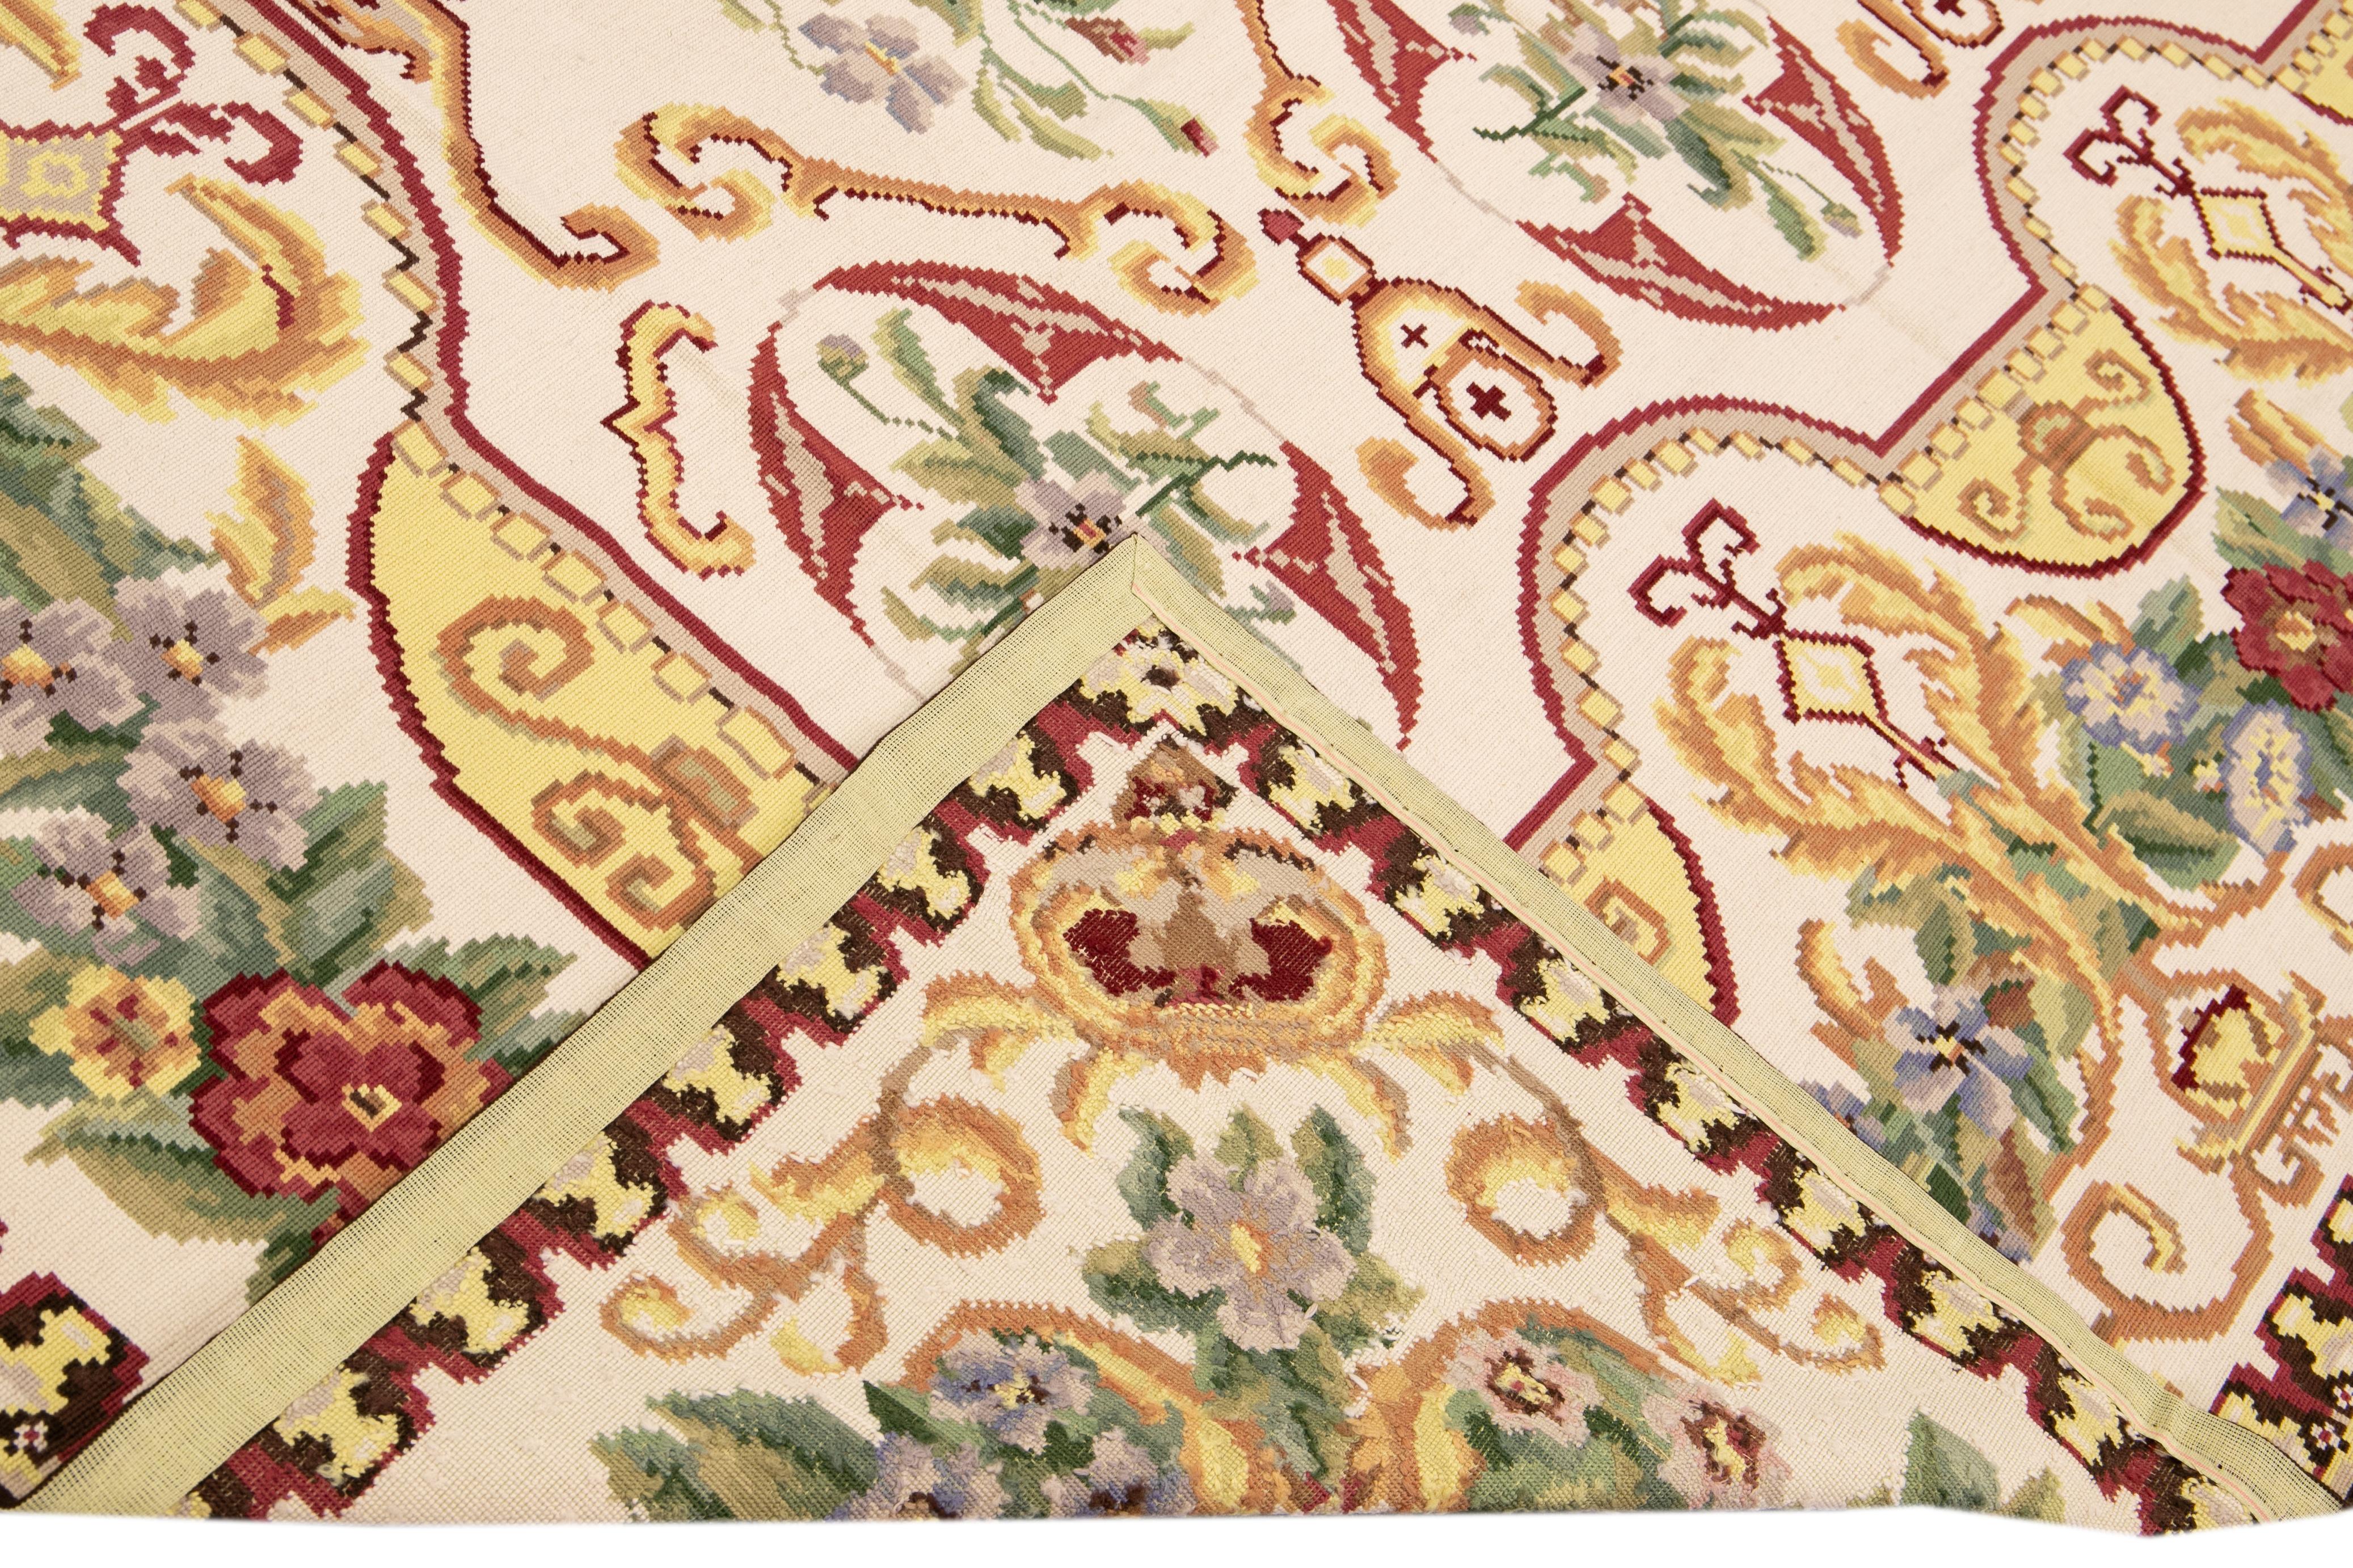 Beautiful Vintage Aubusson Style needlepoint wool rug with an Ivory field. This piece has fine details in a gorgeous multicolor all-over floral pattern design. 

This rug measures 9'1